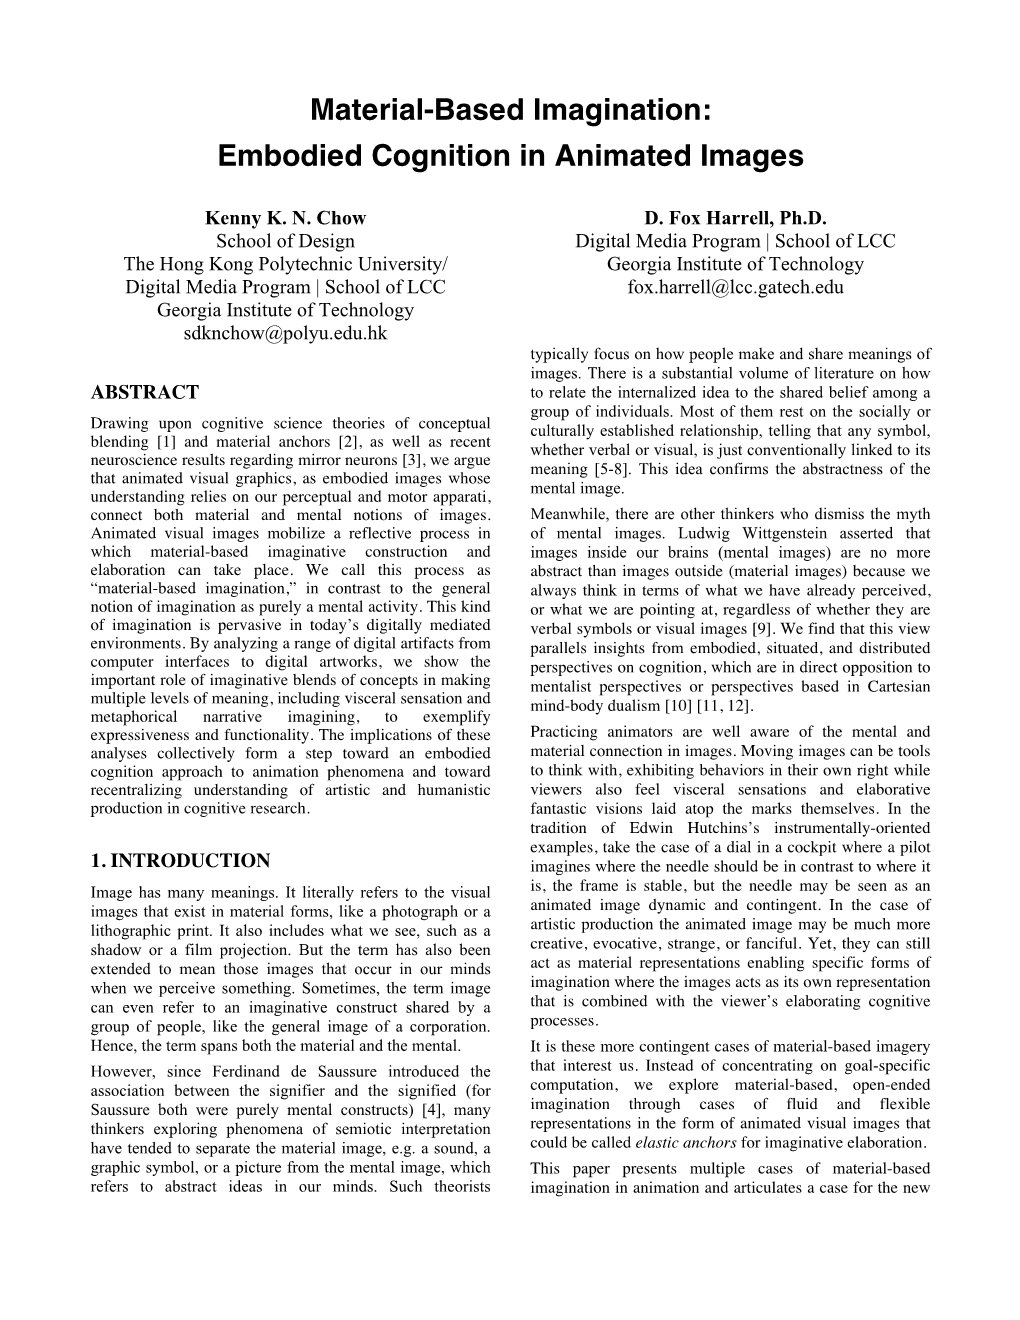 Embodied Cognition in Animated Images